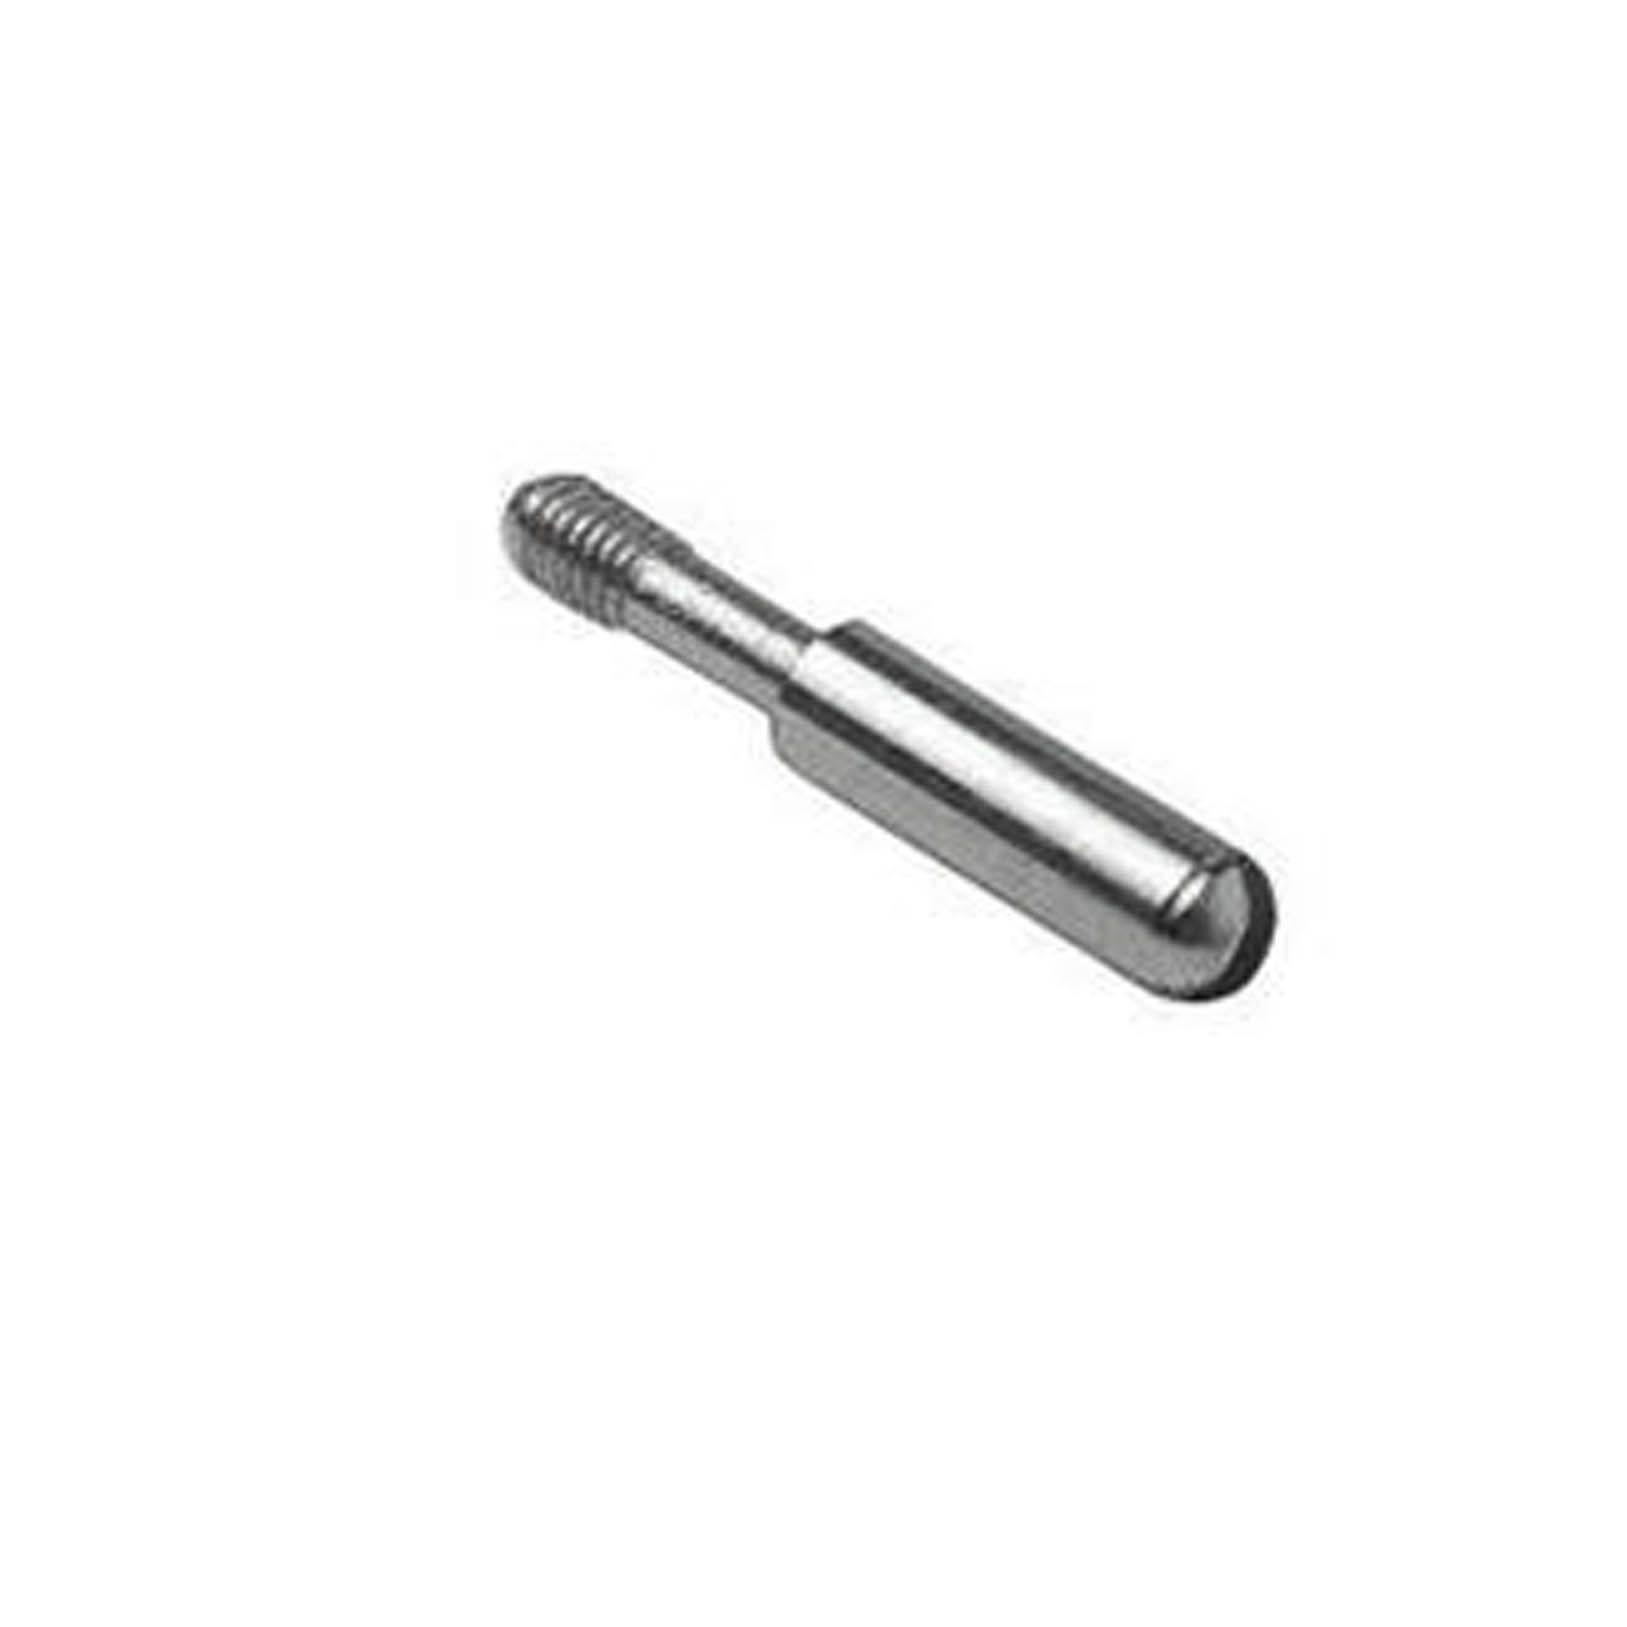 Mencom CRM Stainless Steel Male Coding Pin